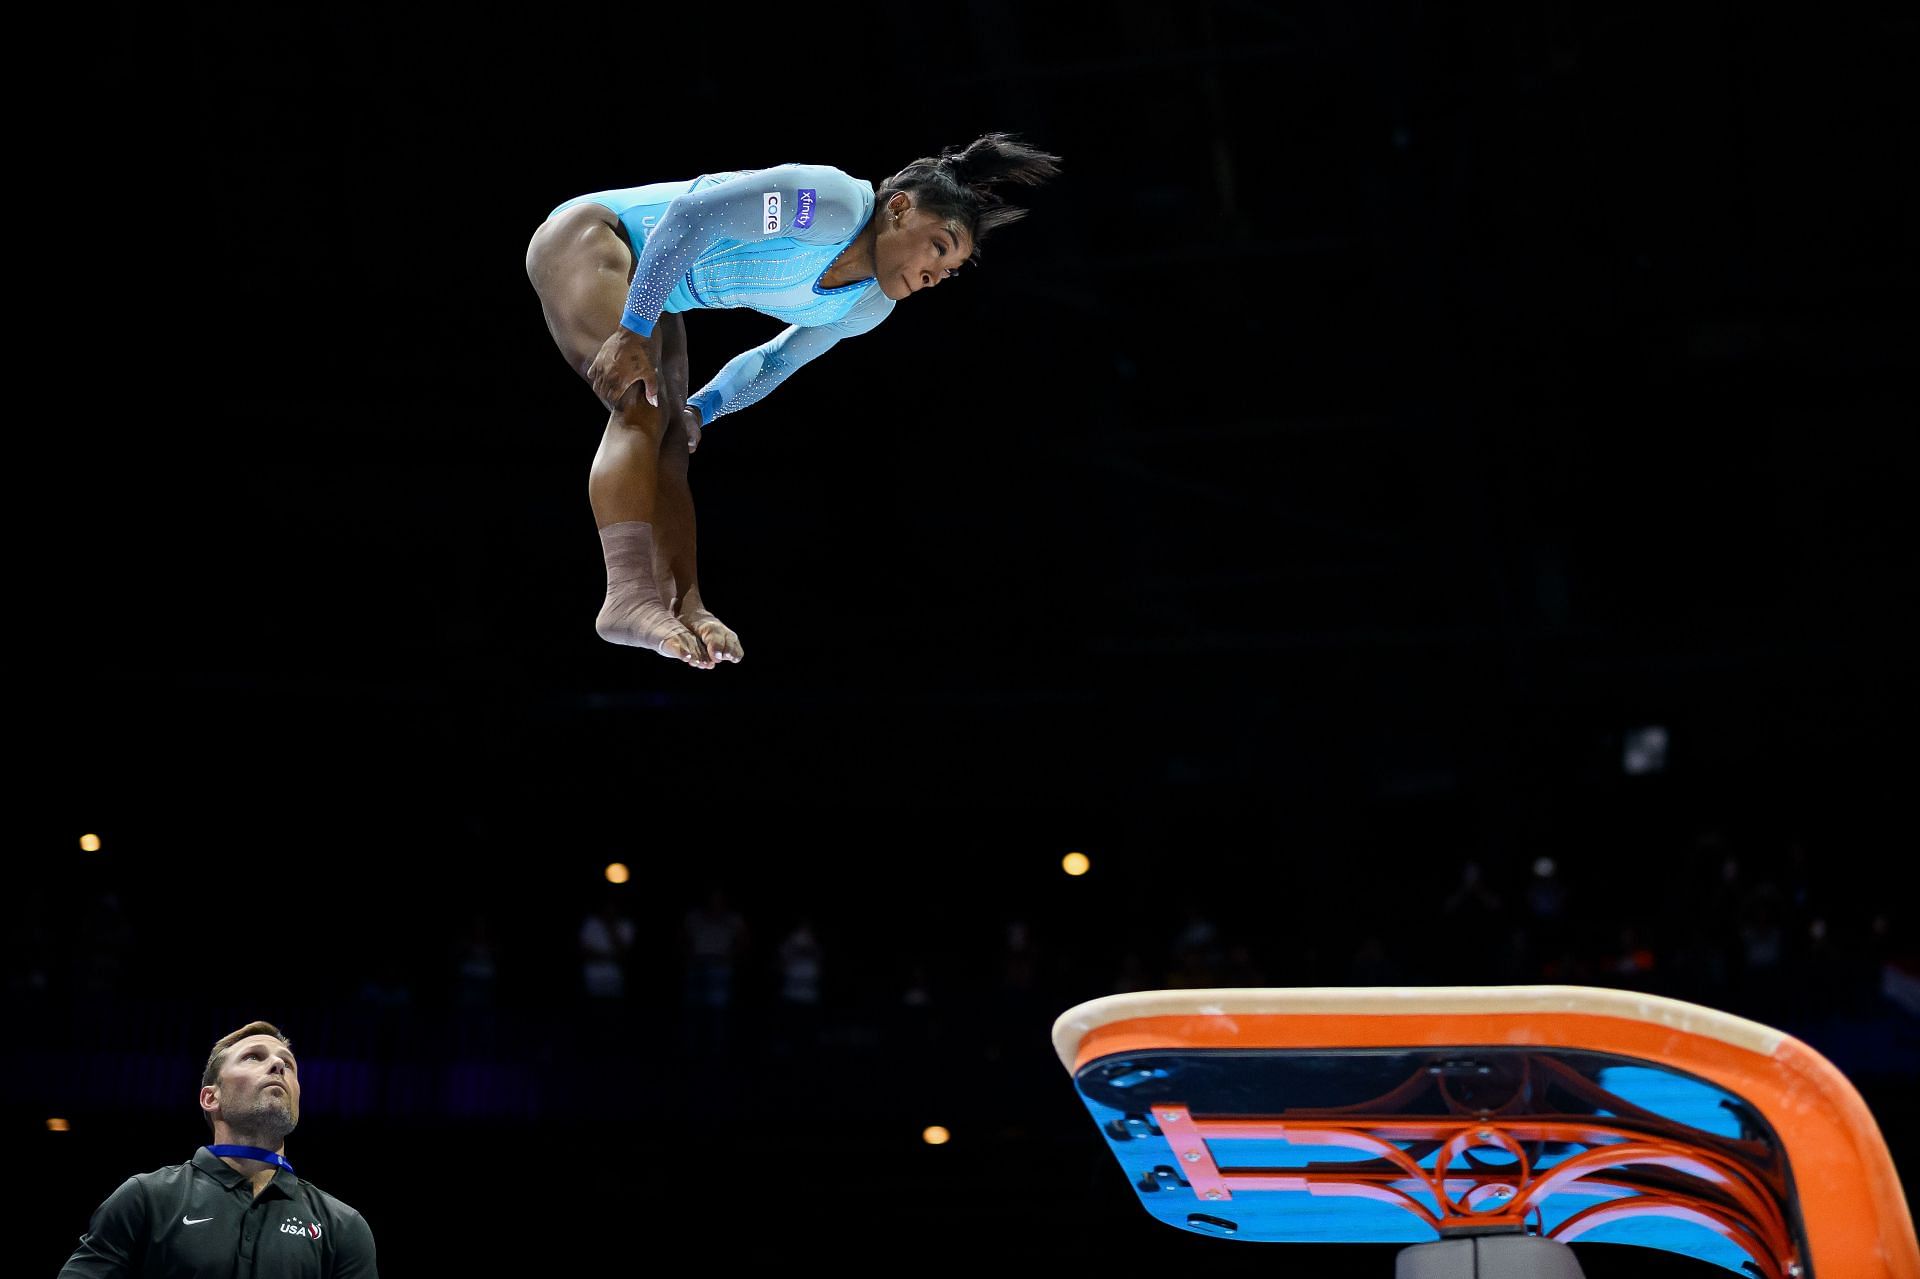 Simone Biles performing the Yurchenko double pike vault. (PC: Getty Images)